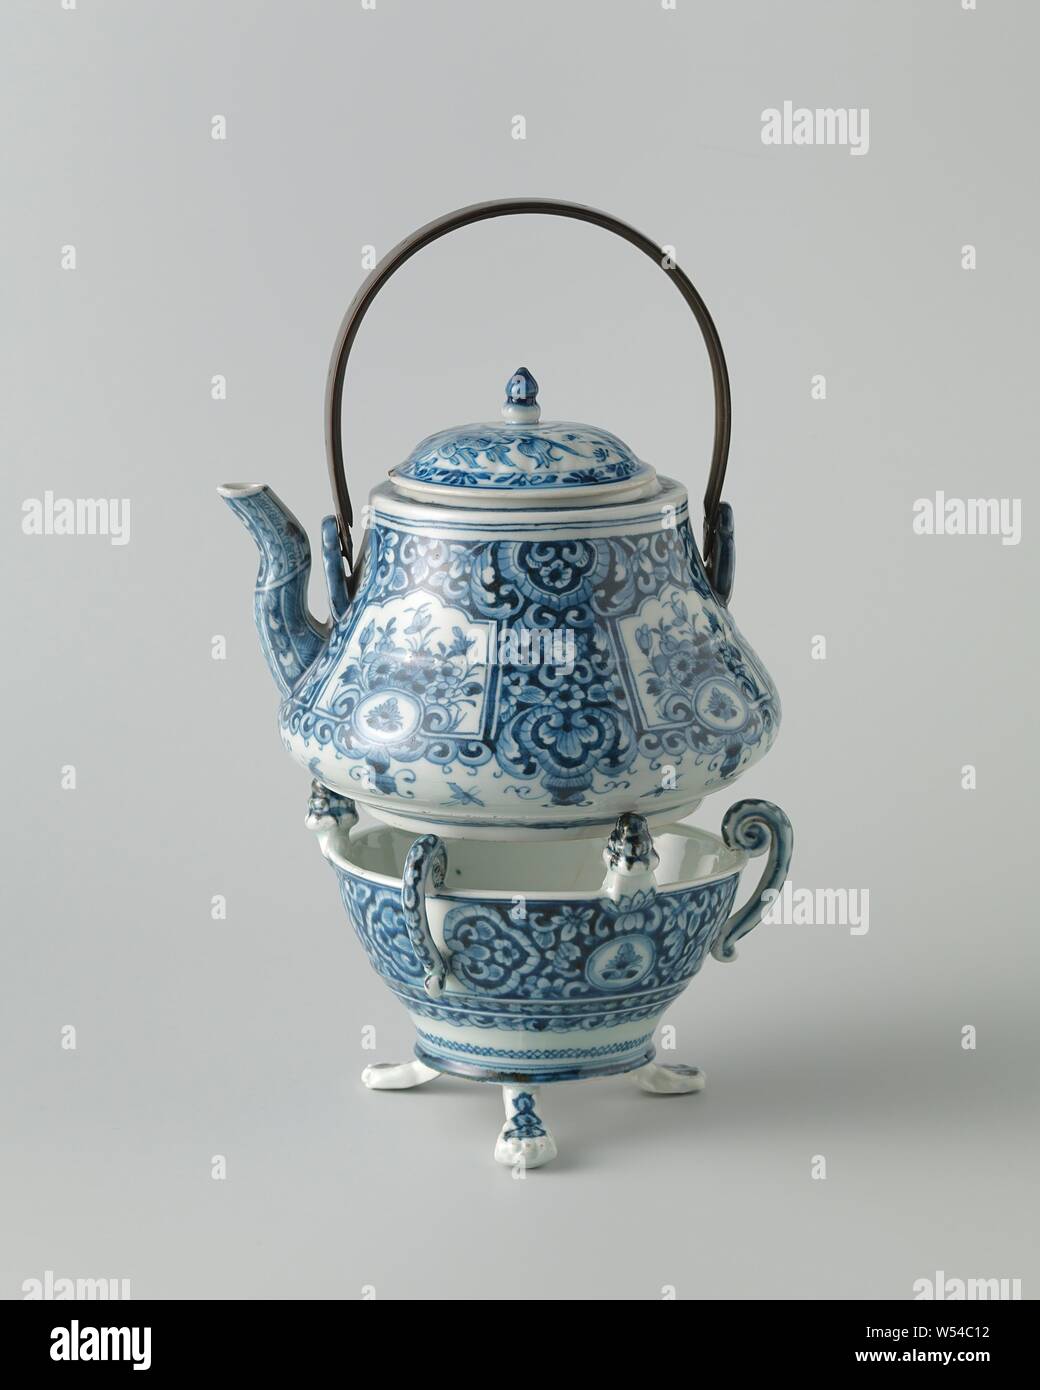 Kettle with flowering plants and foliate scrolls, Printed baluster-shaped kettle made of porcelain with an S-shaped spout and two eyes to which a whale bone handle is attached. Painted in underglaze blue. On the wall of the kettle four rectangular boxes, painted at the top, with a medallion with a flower branch at the bottom. Flowering plants in the boxes. The boxes are cut into a background of leaf vines, lambrequins and small human heads with curly hair. Blue White., anonymous, Japan, c. 1750, Edo-period (1600-1868), porcelain (material), glaze, cobalt (mineral), hengsel, vitrification, h 13 Stock Photo